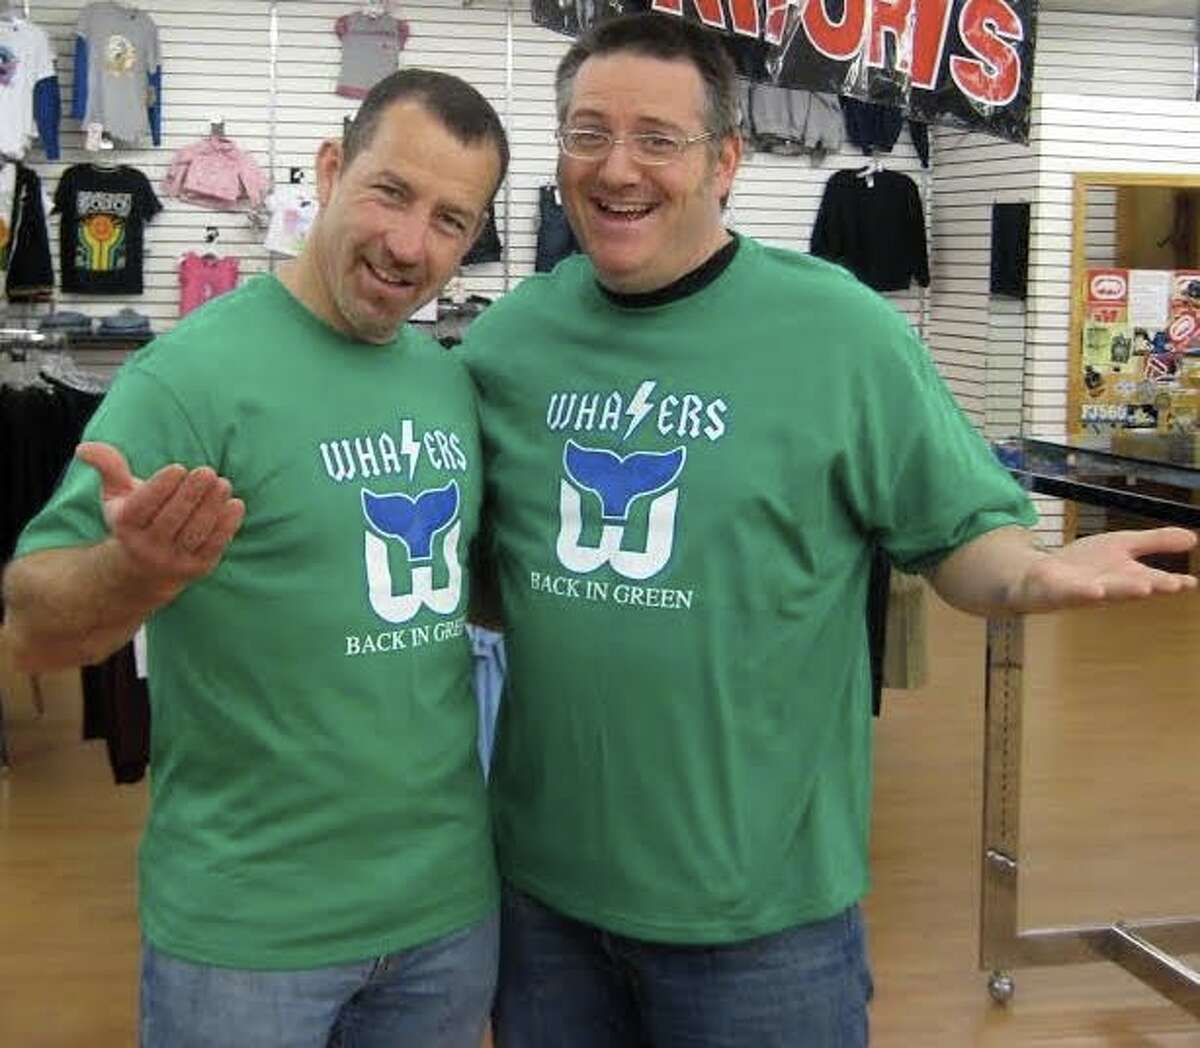 Former Hartford Whalers captain Kevin Dineen, right, stopped in at Dave Schneider’s Bridgeport store, Jimmy’s, 11 years after the last Whalers hockey game, when Dineen was a coach in Portland, Maine. He bought a Whalers T-shirt. Schneider, at right, is “defenseman, guitarist and singer” for the hockey-rock band The Zambonis.